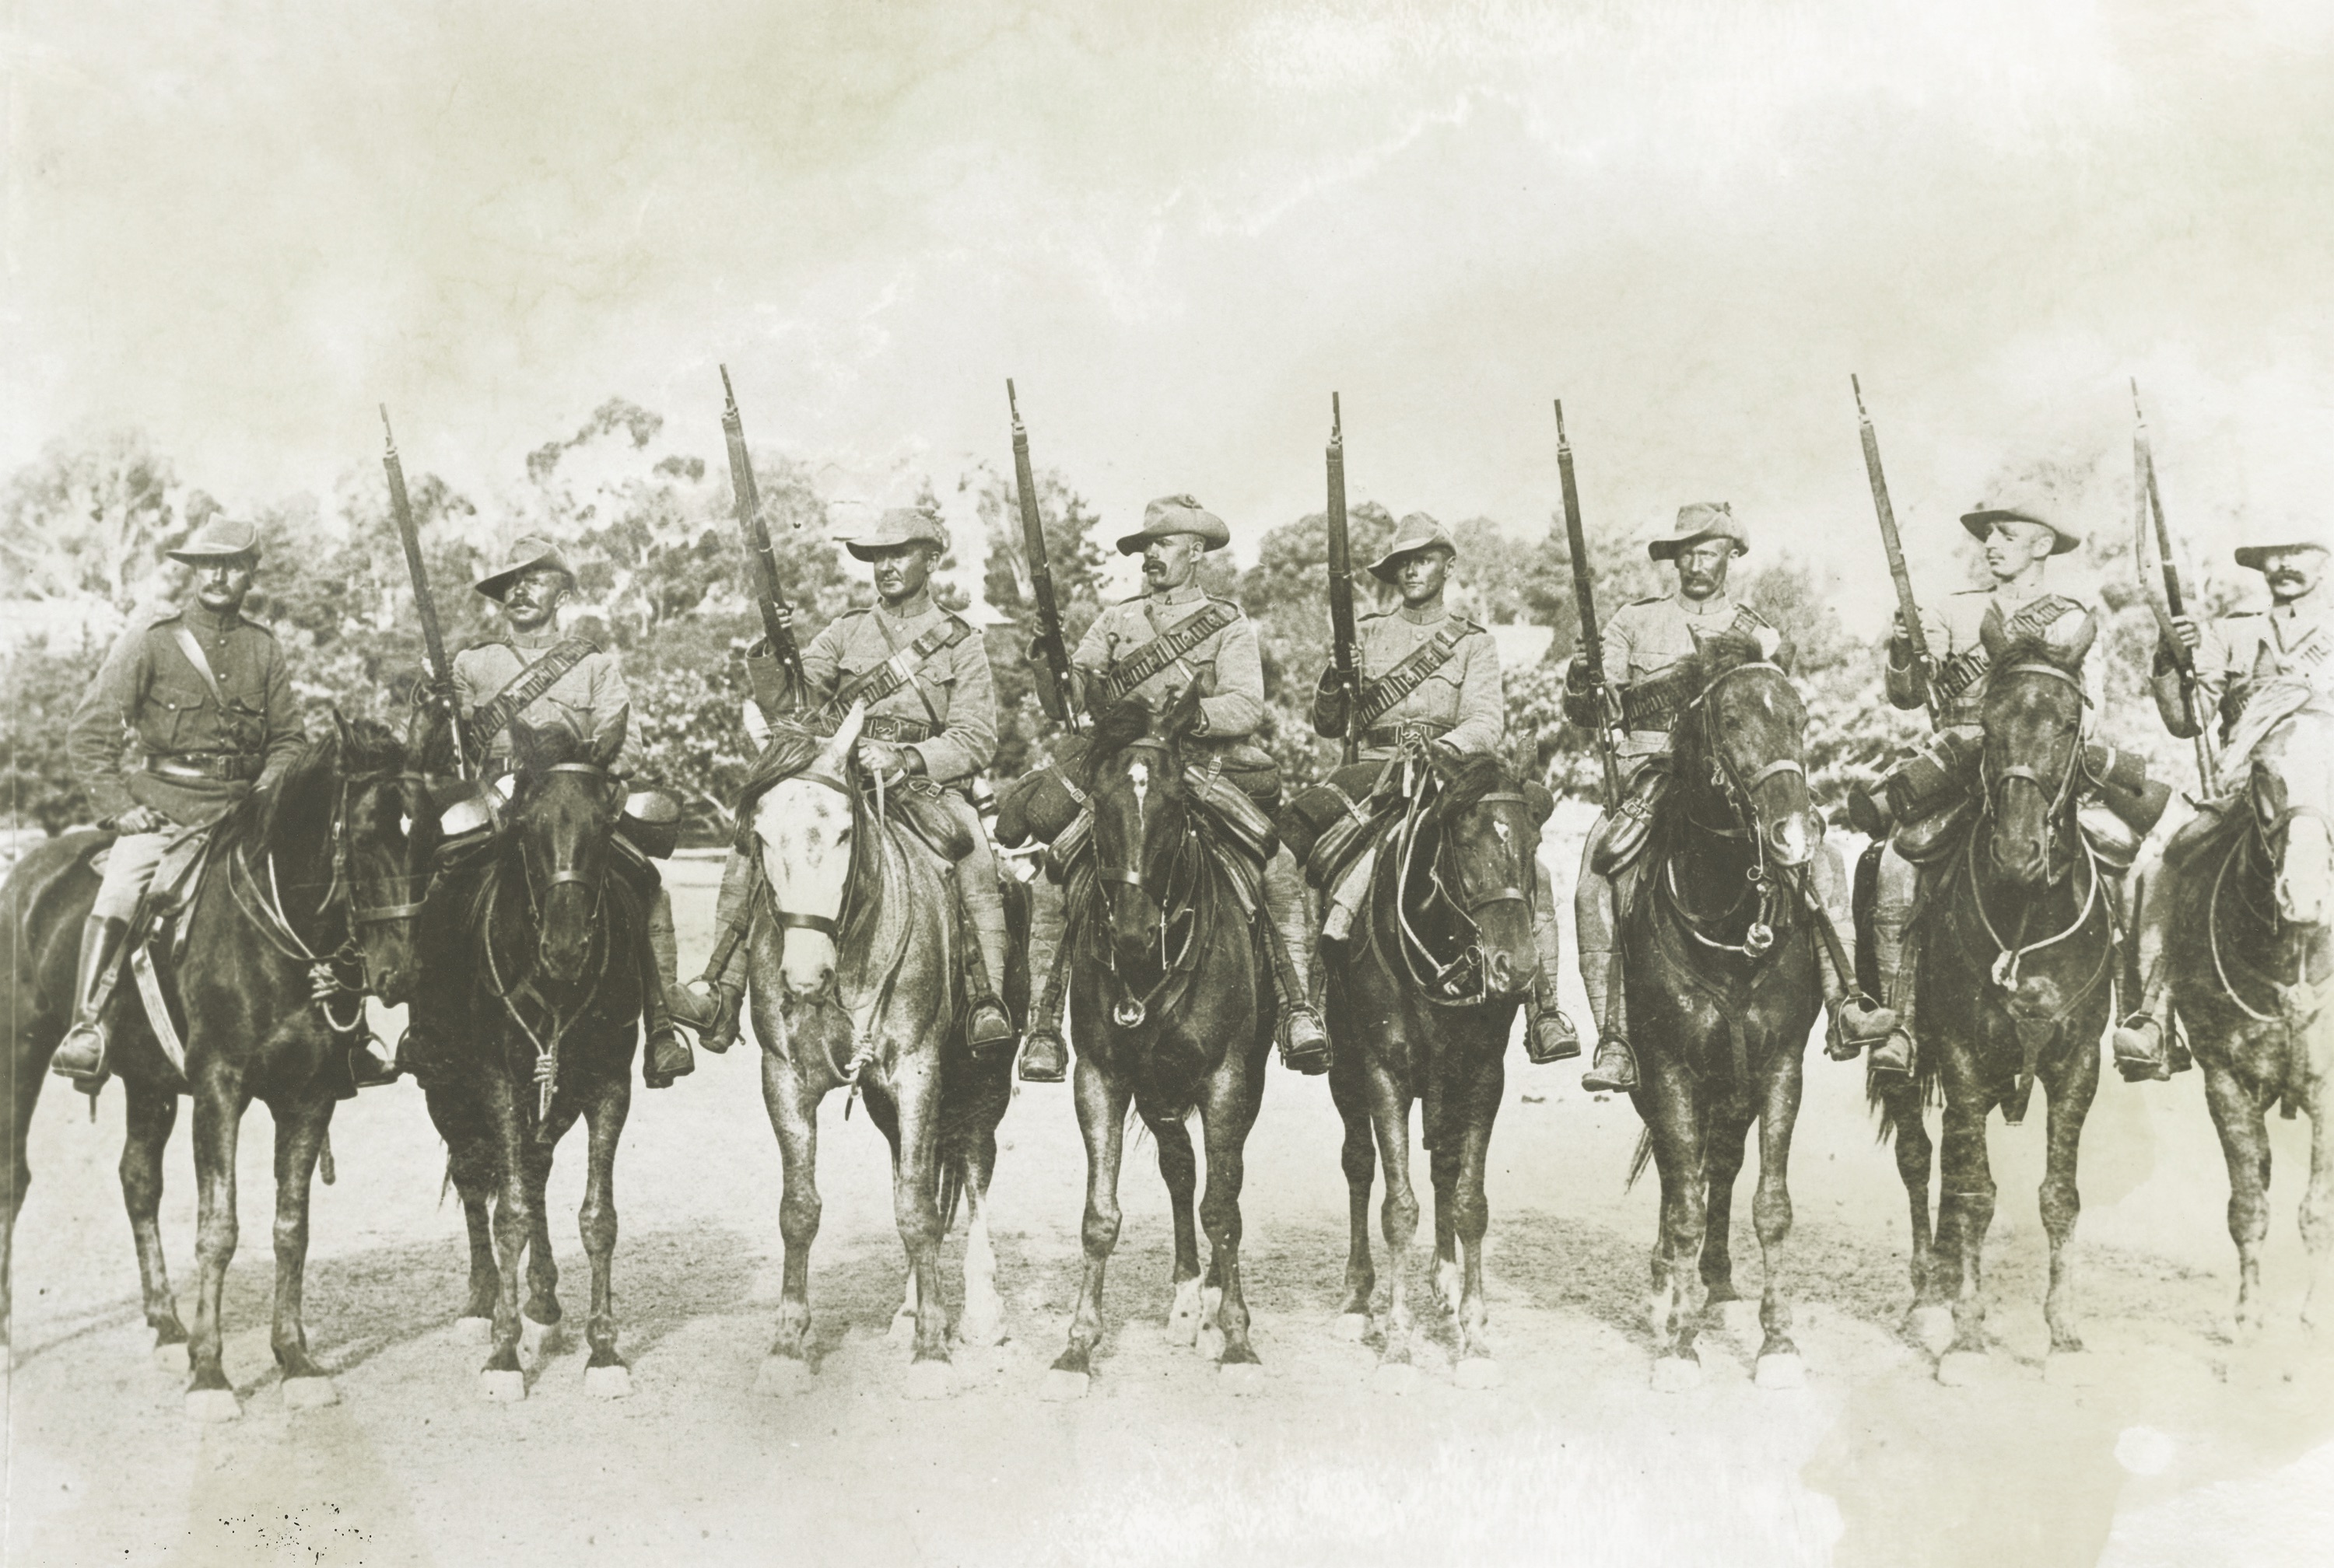 Morant was no stranger to mounted warfare in South Africa. Above, he poses third from left during his 1900 deployment as a lance corporal riding dispatch with the South Australian Volunteer Contingent. (Australian War Memorial)